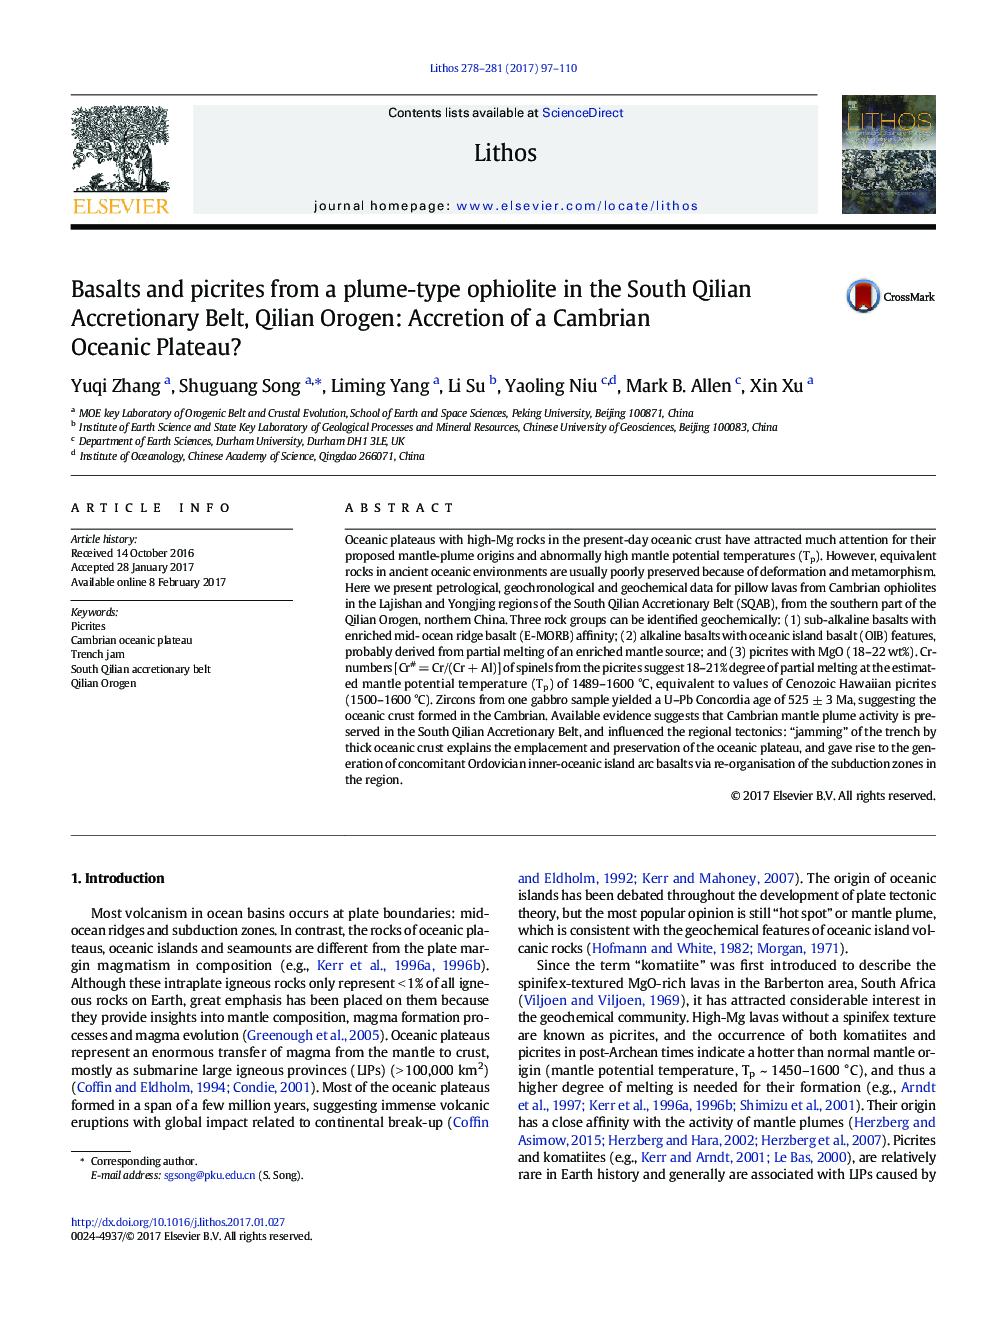 Basalts and picrites from a plume-type ophiolite in the South Qilian Accretionary Belt, Qilian Orogen: Accretion of a Cambrian Oceanic Plateau?